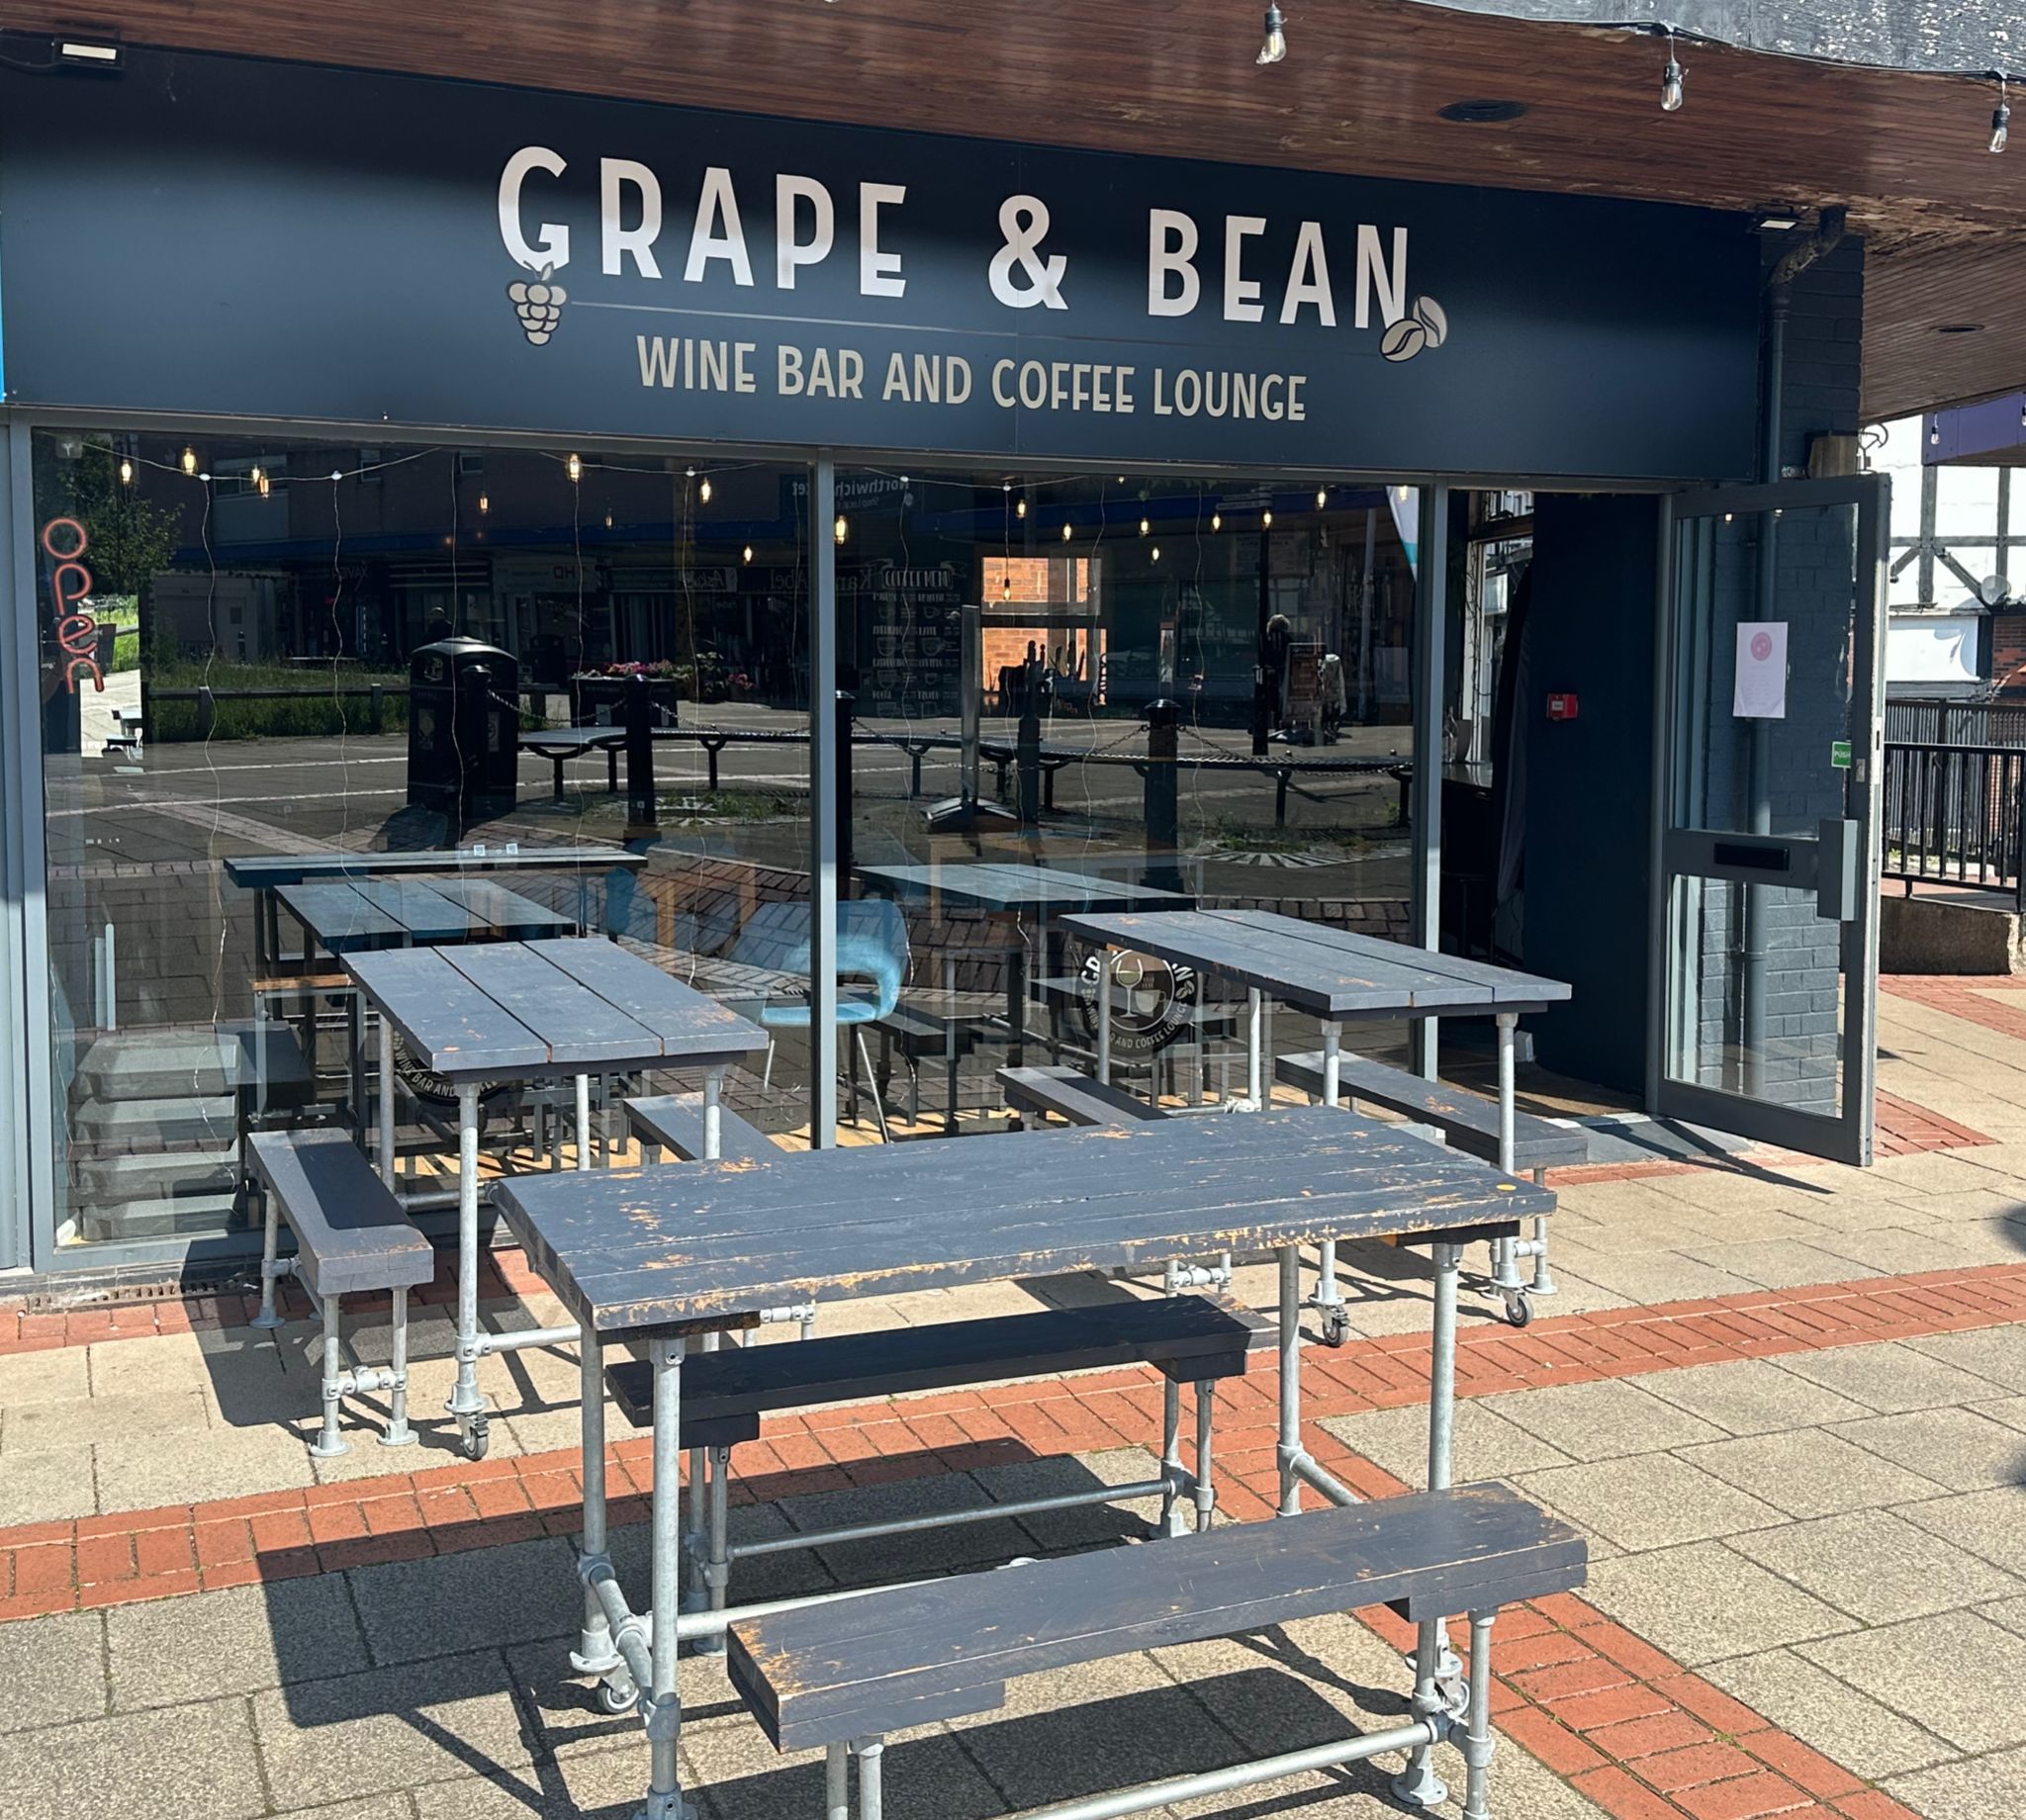 The Grape and Bean on Market Street in Northwich